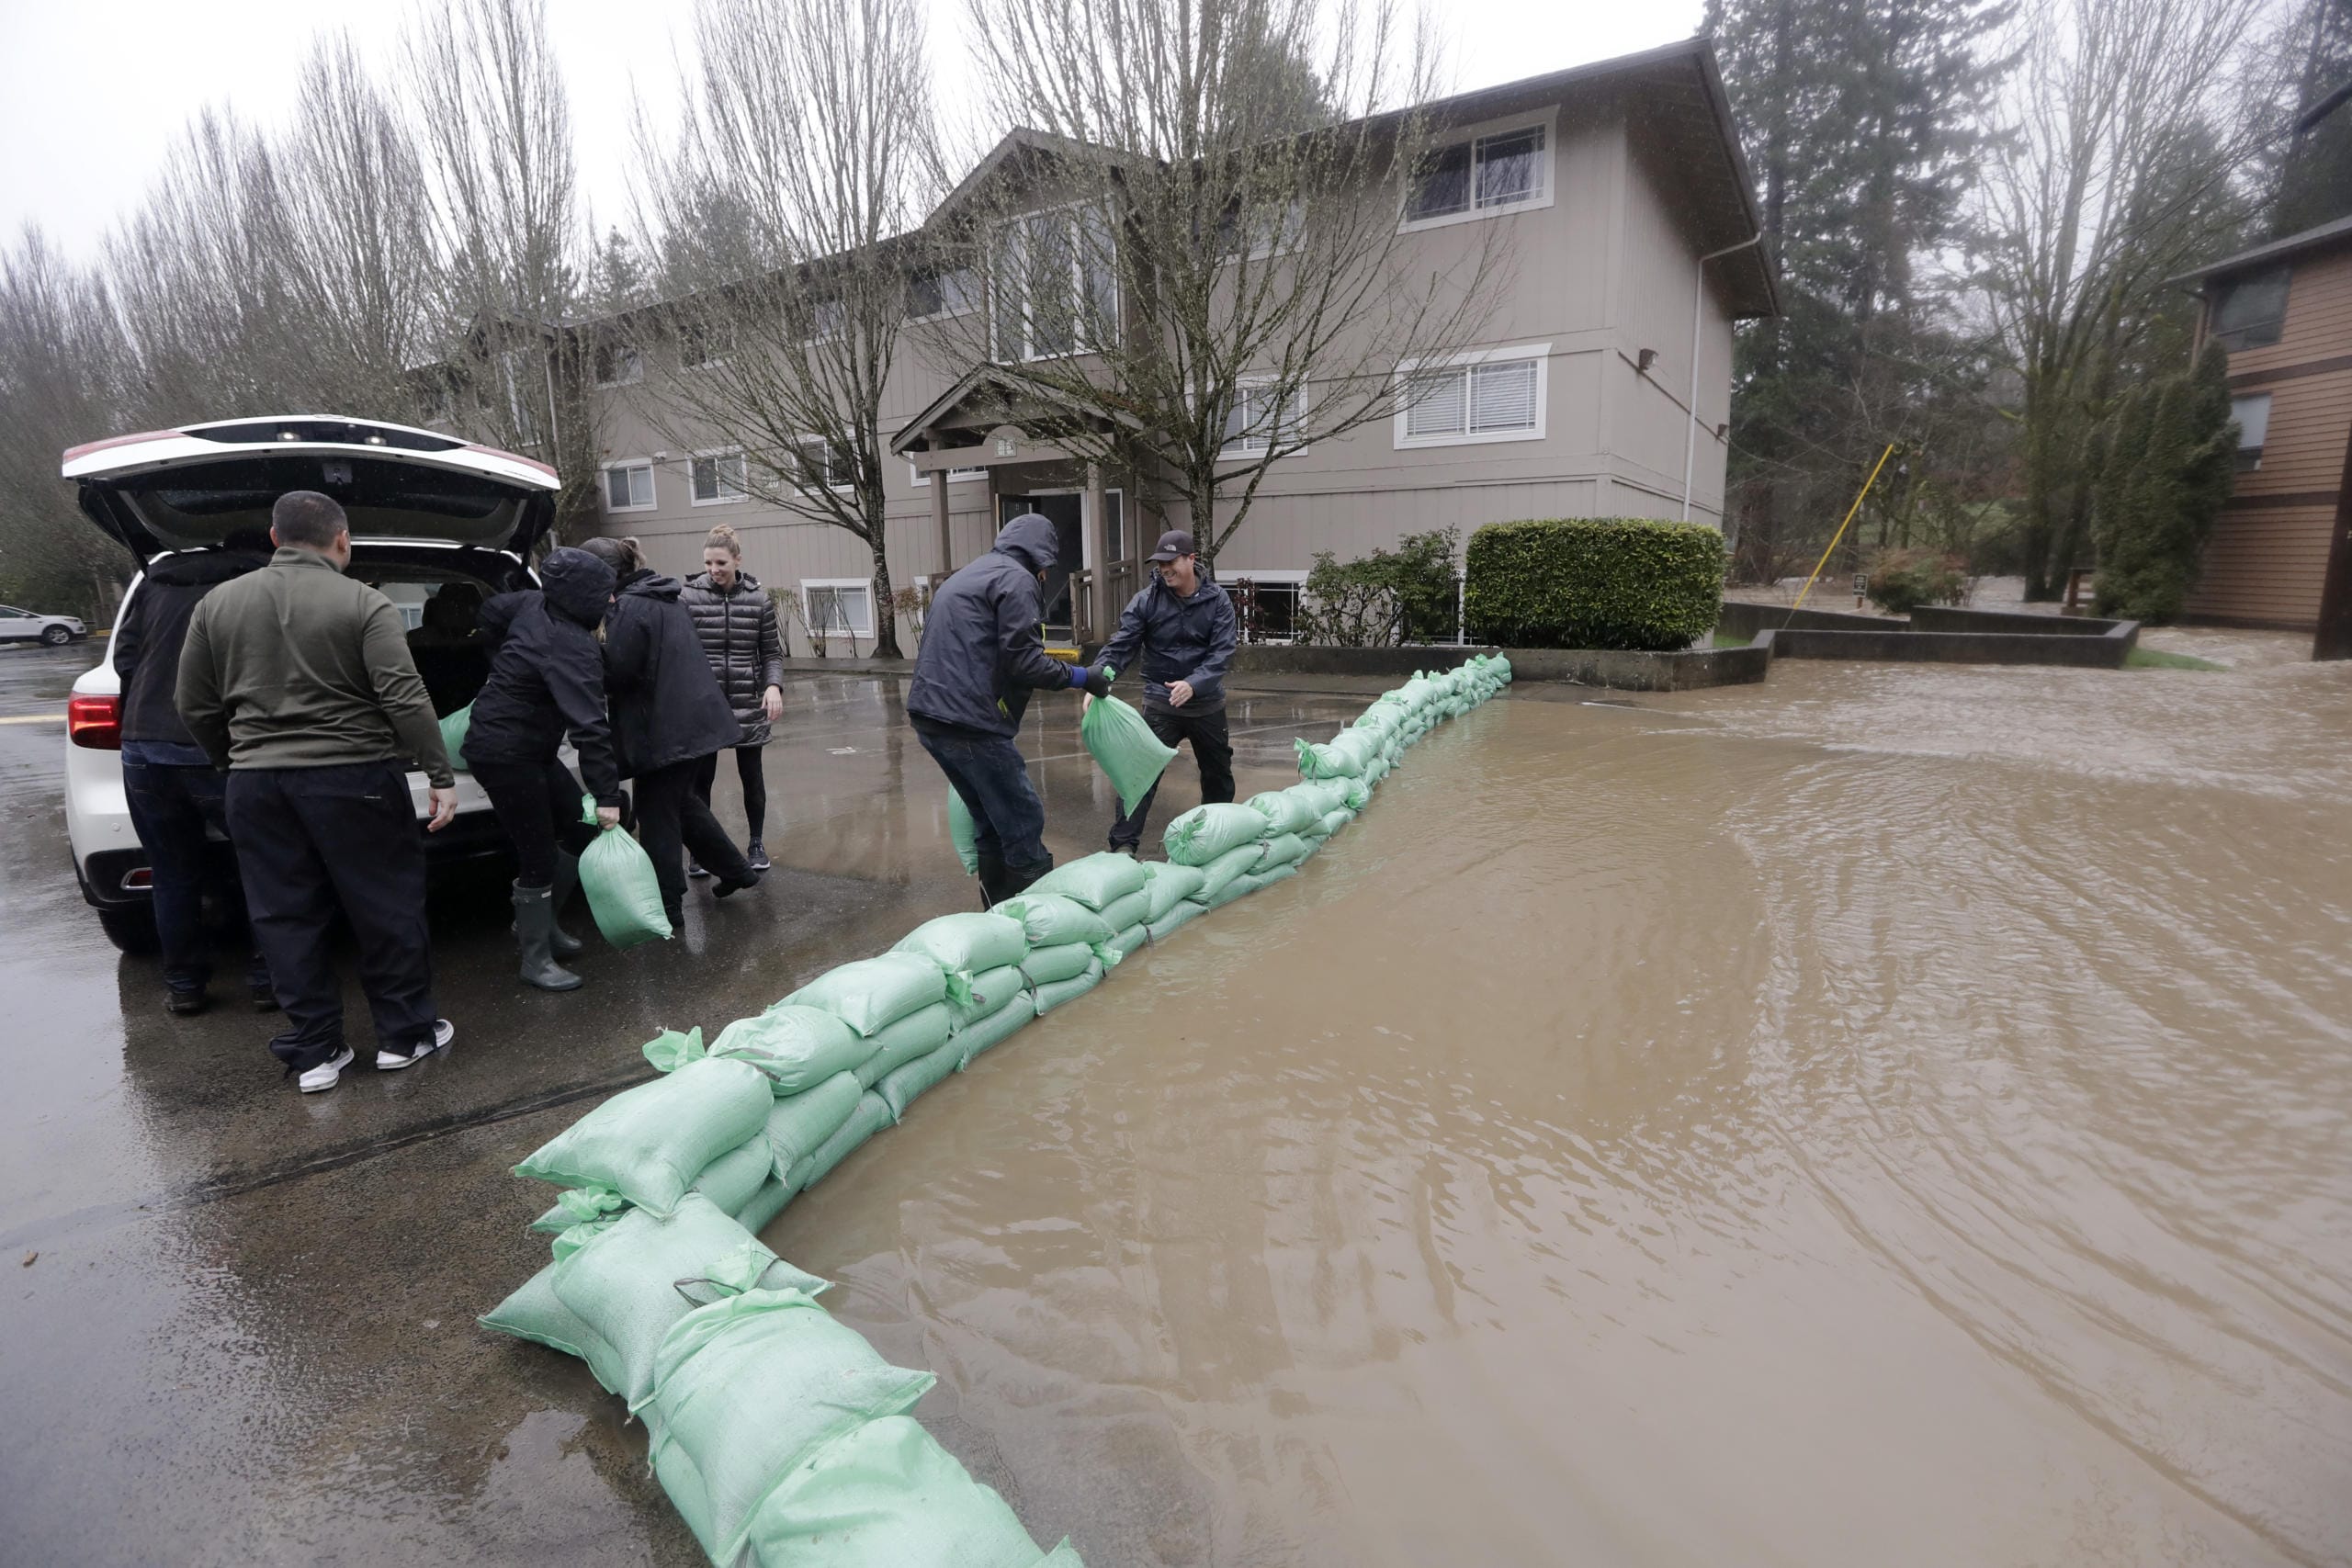 Residents and volunteers work to place sandbags at an apartment complex as flood waters rise Thursday, Feb. 6, 2020, in Issaquah, Wash. Heavy rain sent the creek over a major roadway, under an apartment building east of Seattle and up to the foundations of homes as heavy rains pounded the region. A flood watch was in effect through Friday afternoon across most of western Washington. Numerous roads were closed because of water over the roadway. Officials also warned of landslide risks.